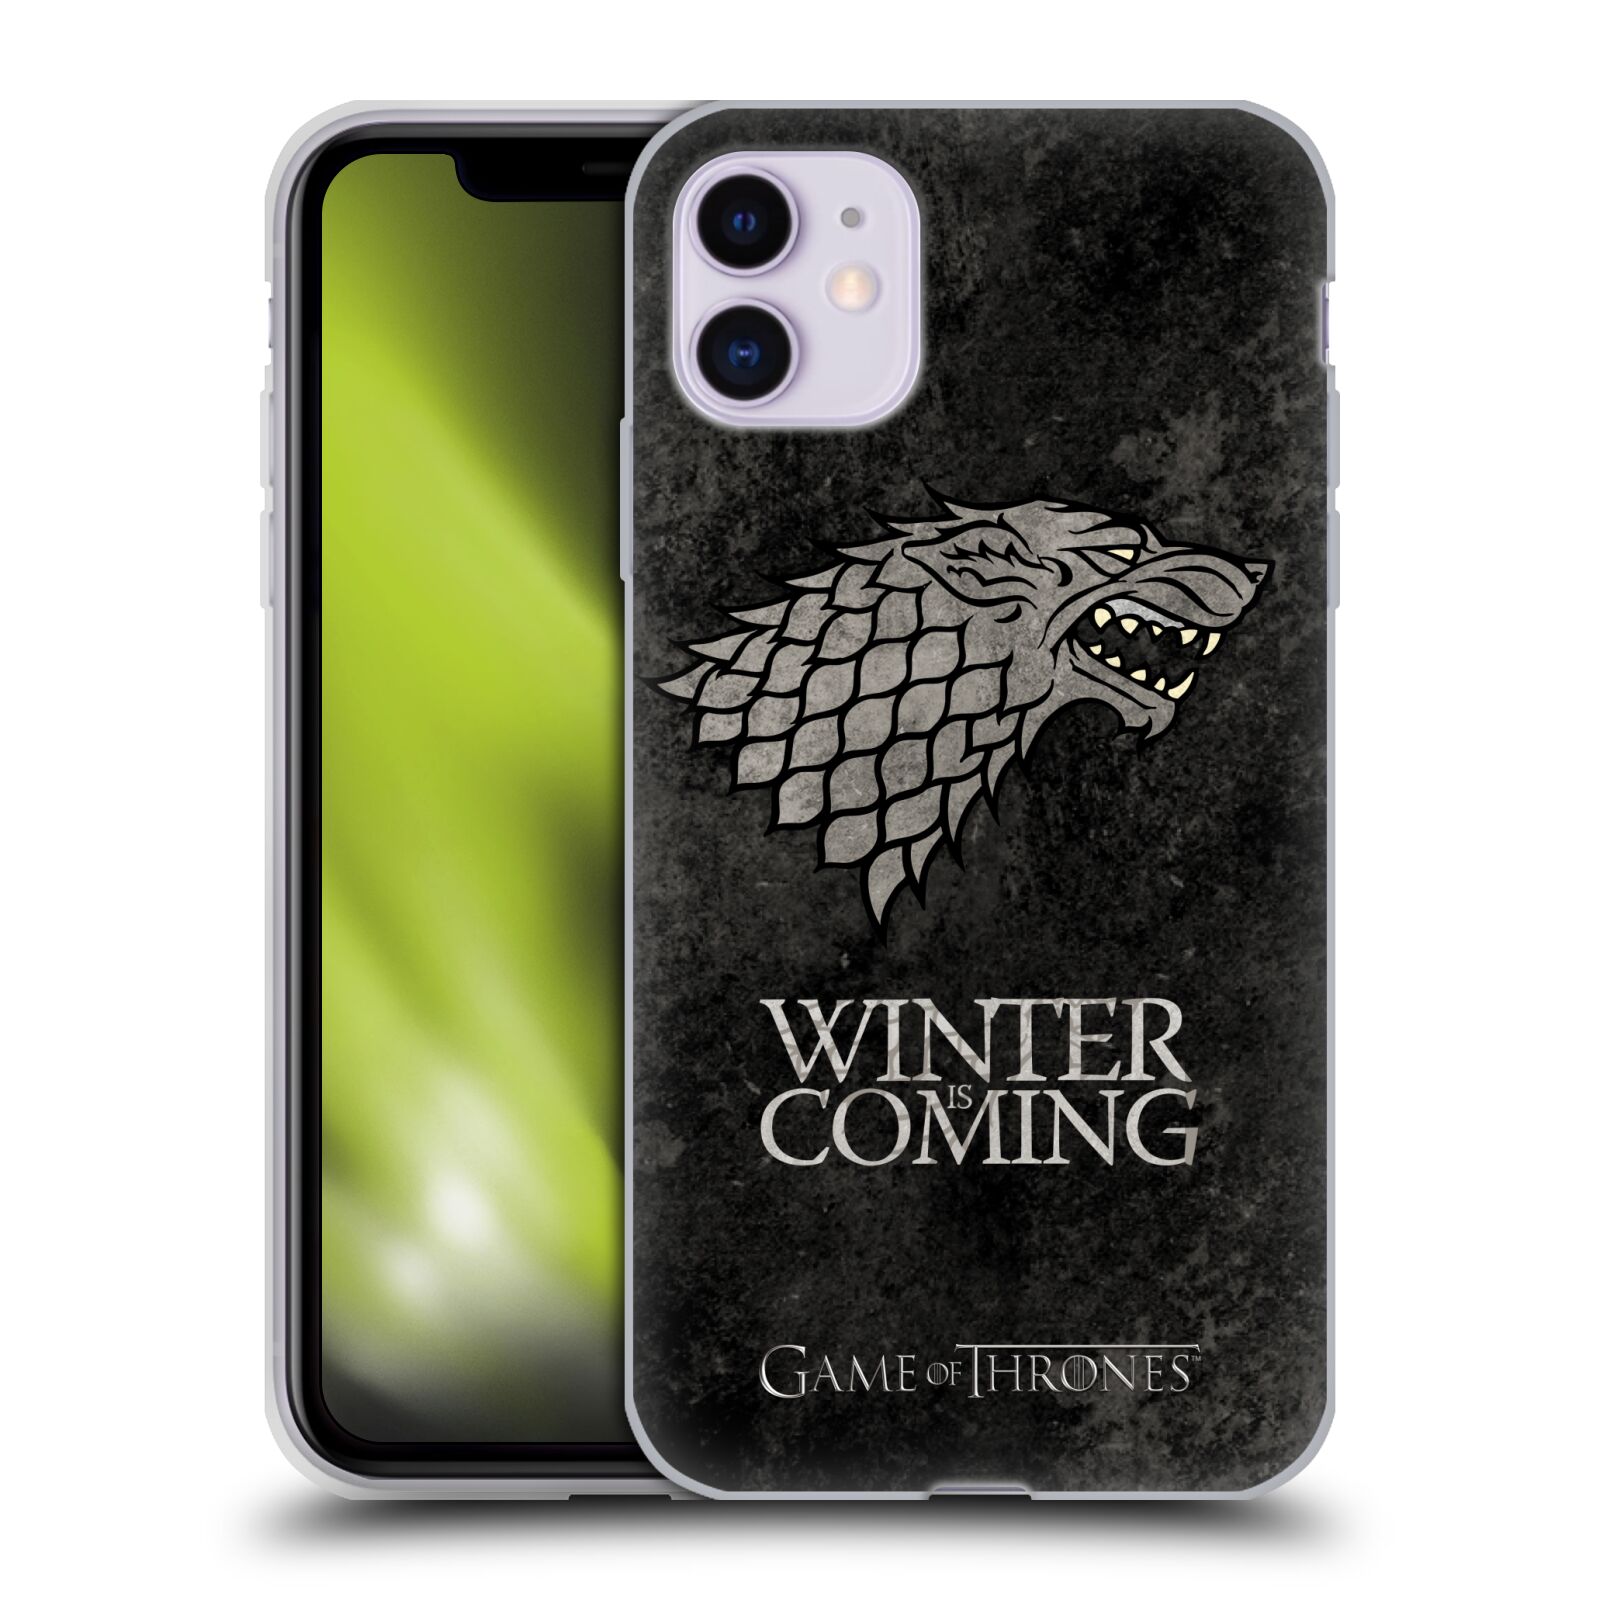 Silikonové pouzdro na mobil Apple iPhone 11 - Head Case - Hra o trůny - Stark - Winter is coming (Silikonový kryt, obal, pouzdro na mobilní telefon Apple iPhone 11 s displejem 6,1" s motivem Hra o trůny - Stark - Winter is coming)